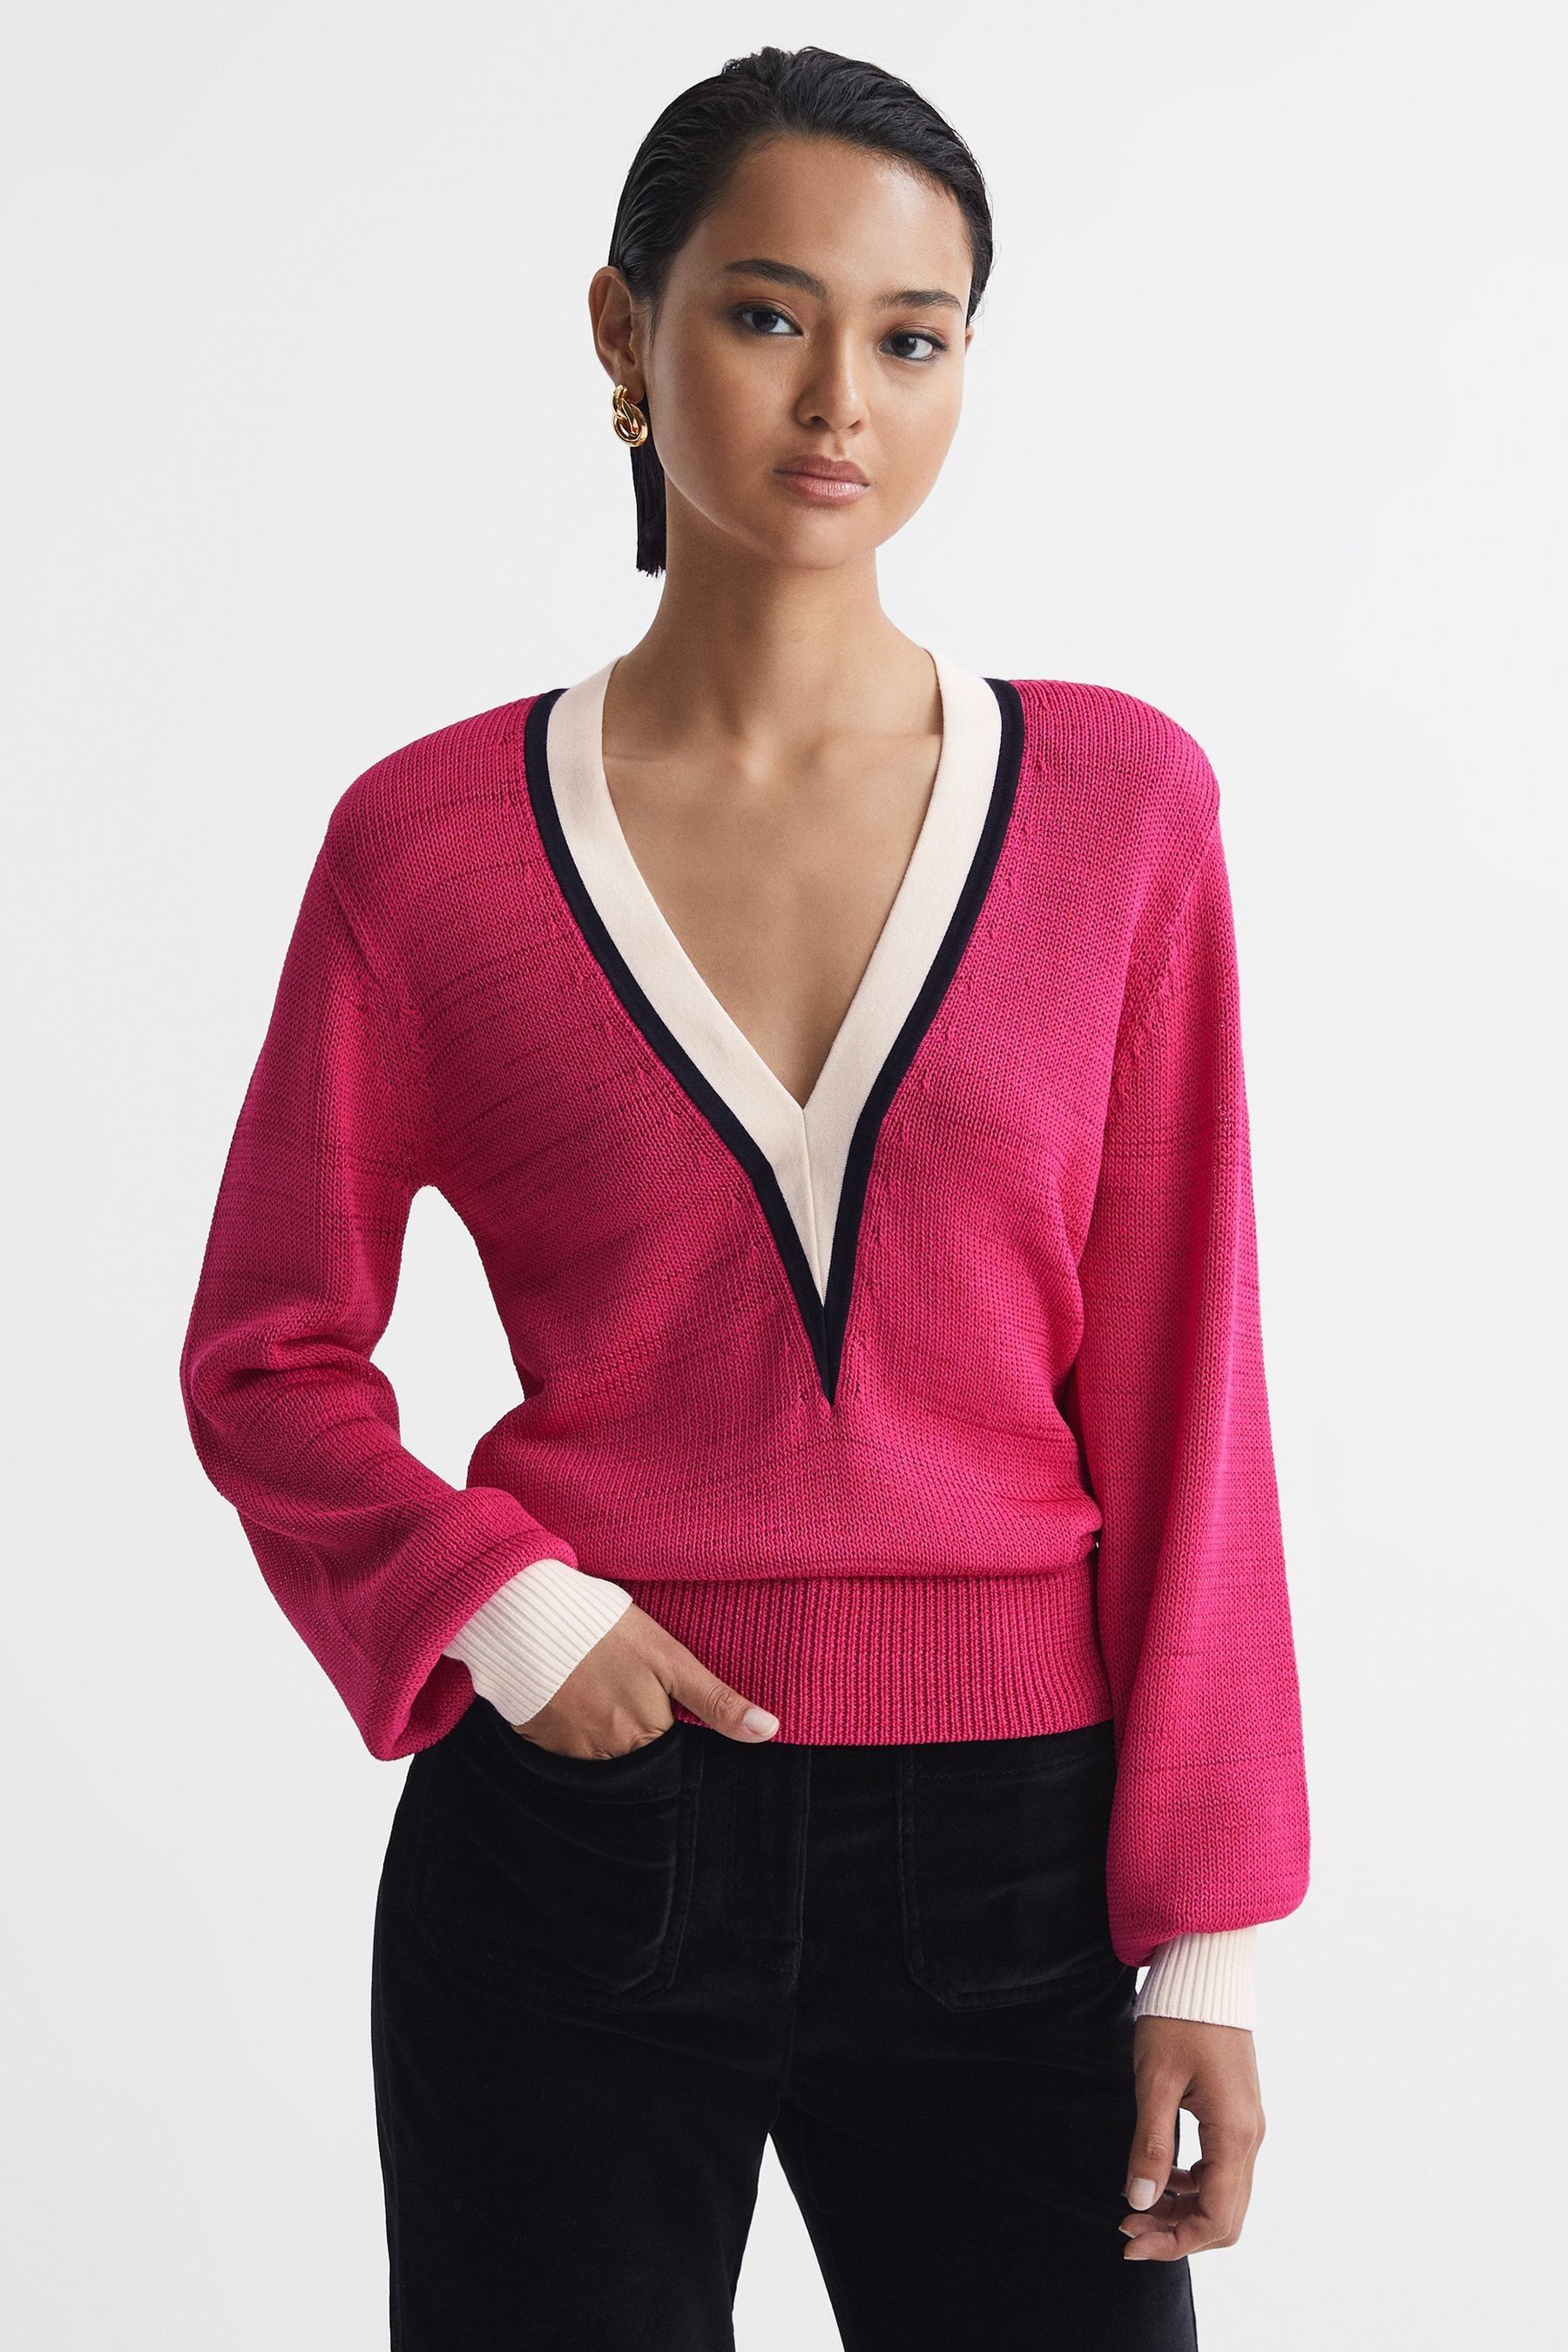 Reiss Talitha - Pink/ivory Contrast Trim Knitted Jumper, S